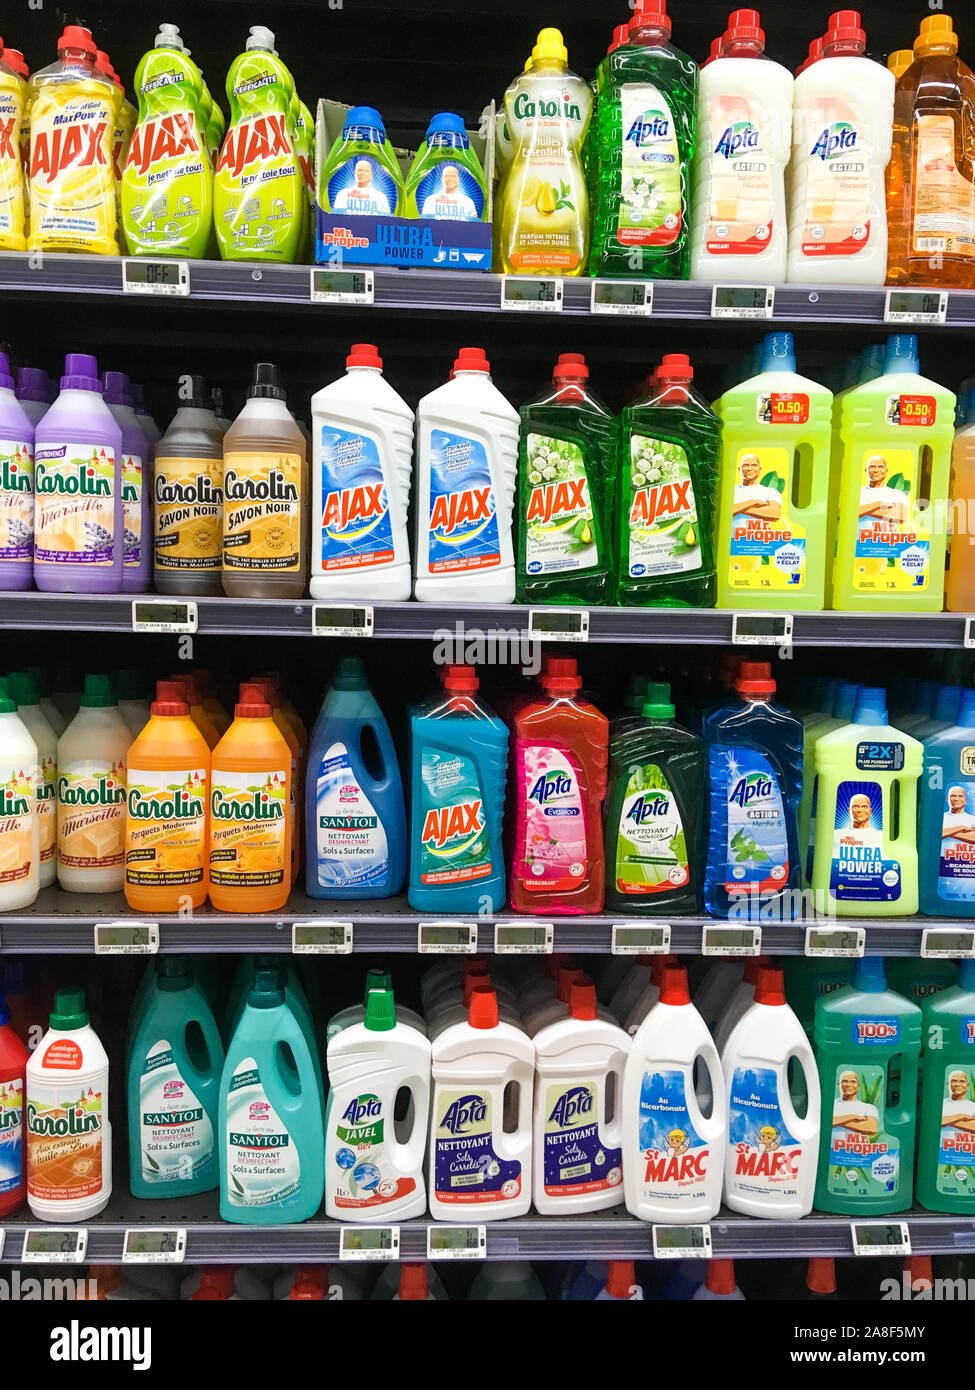 Hundreds of household products conditioned in plastic bottles, Lyon, France Stock Photo